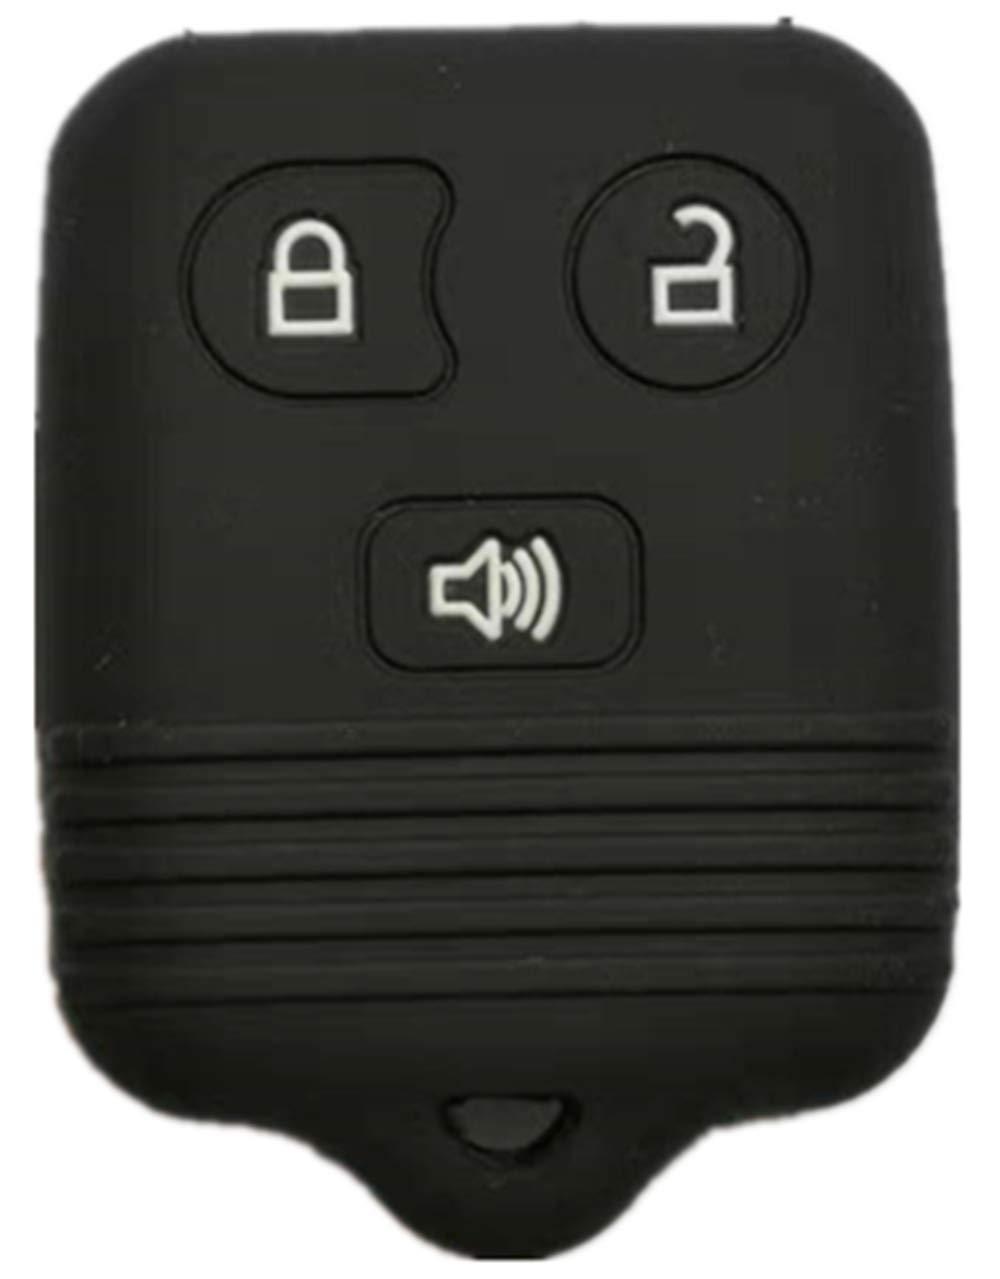  [AUSTRALIA] - RUNZUIE Black Silicone Keyless Entry Remote Key Fob Cover Case Protector Fit for Ford Mazda (3 Buttons)